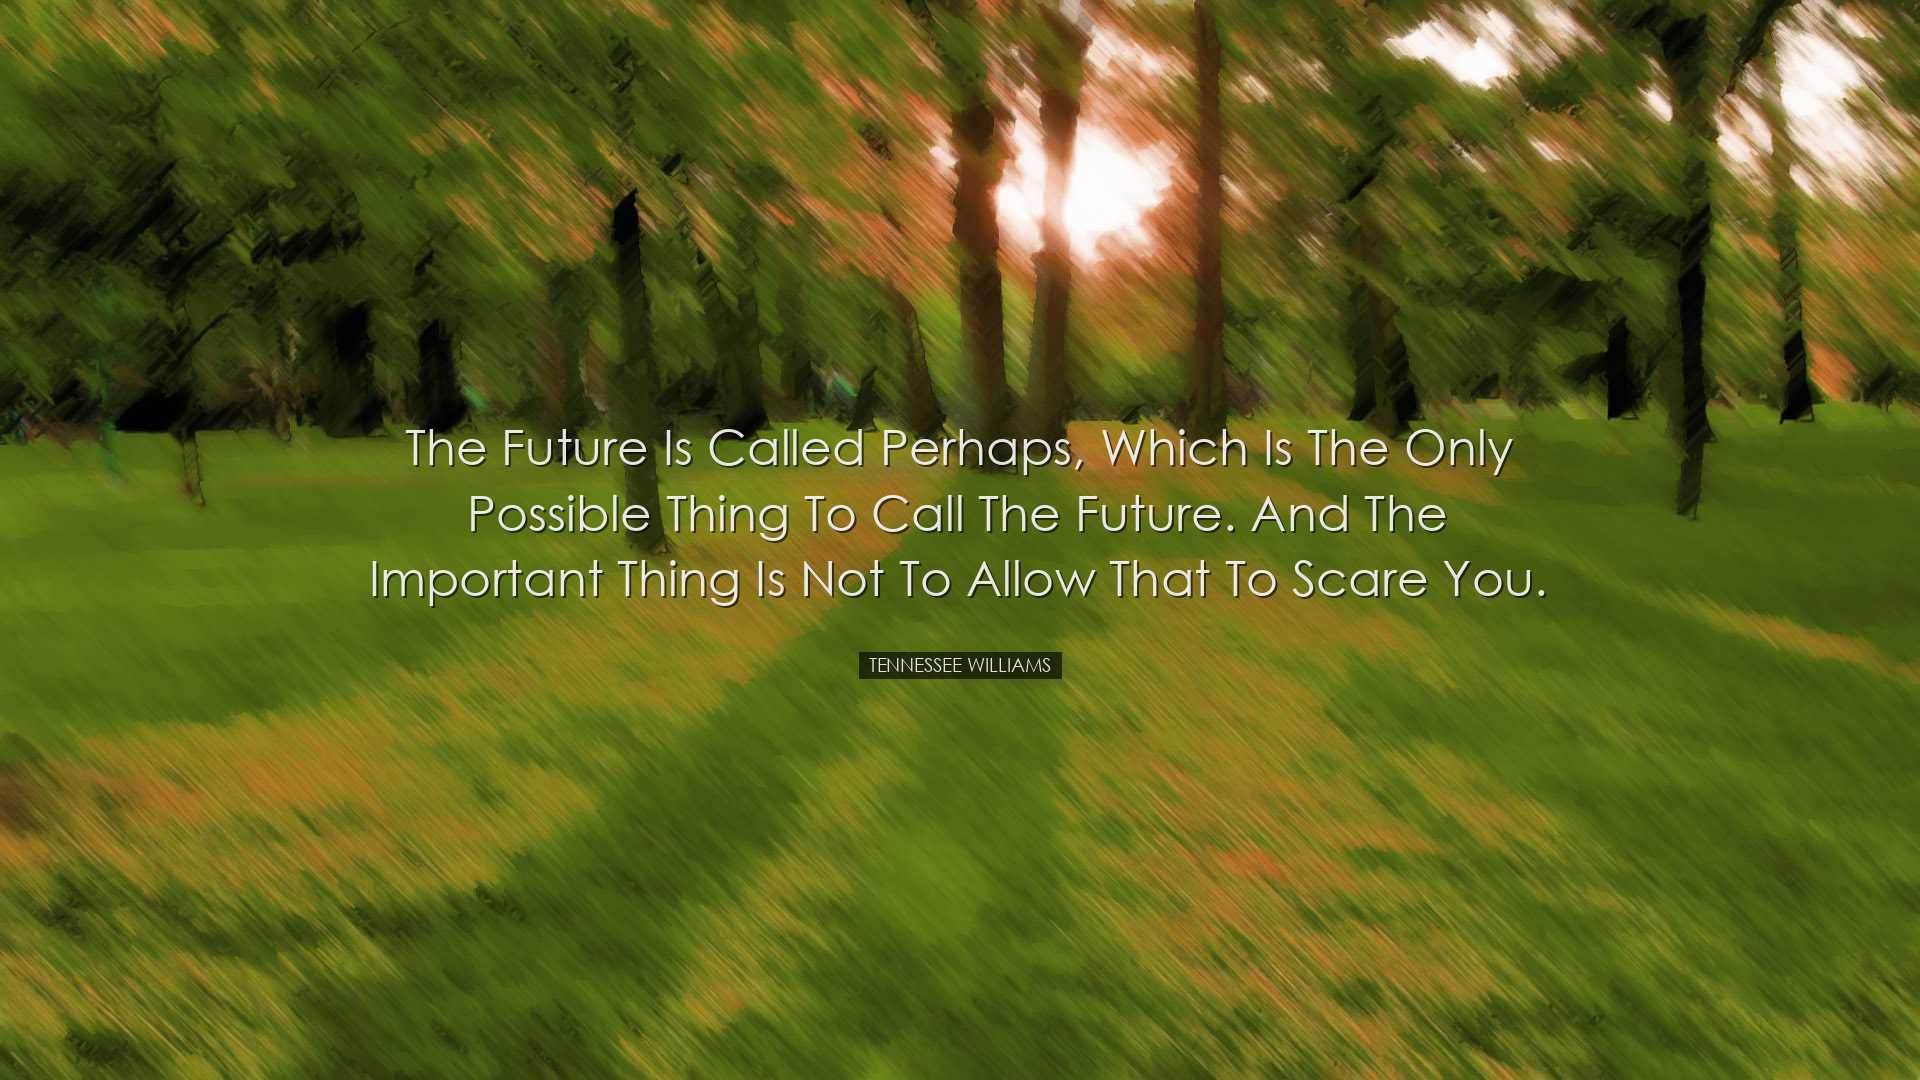 The future is called perhaps, which is the only possible thing to